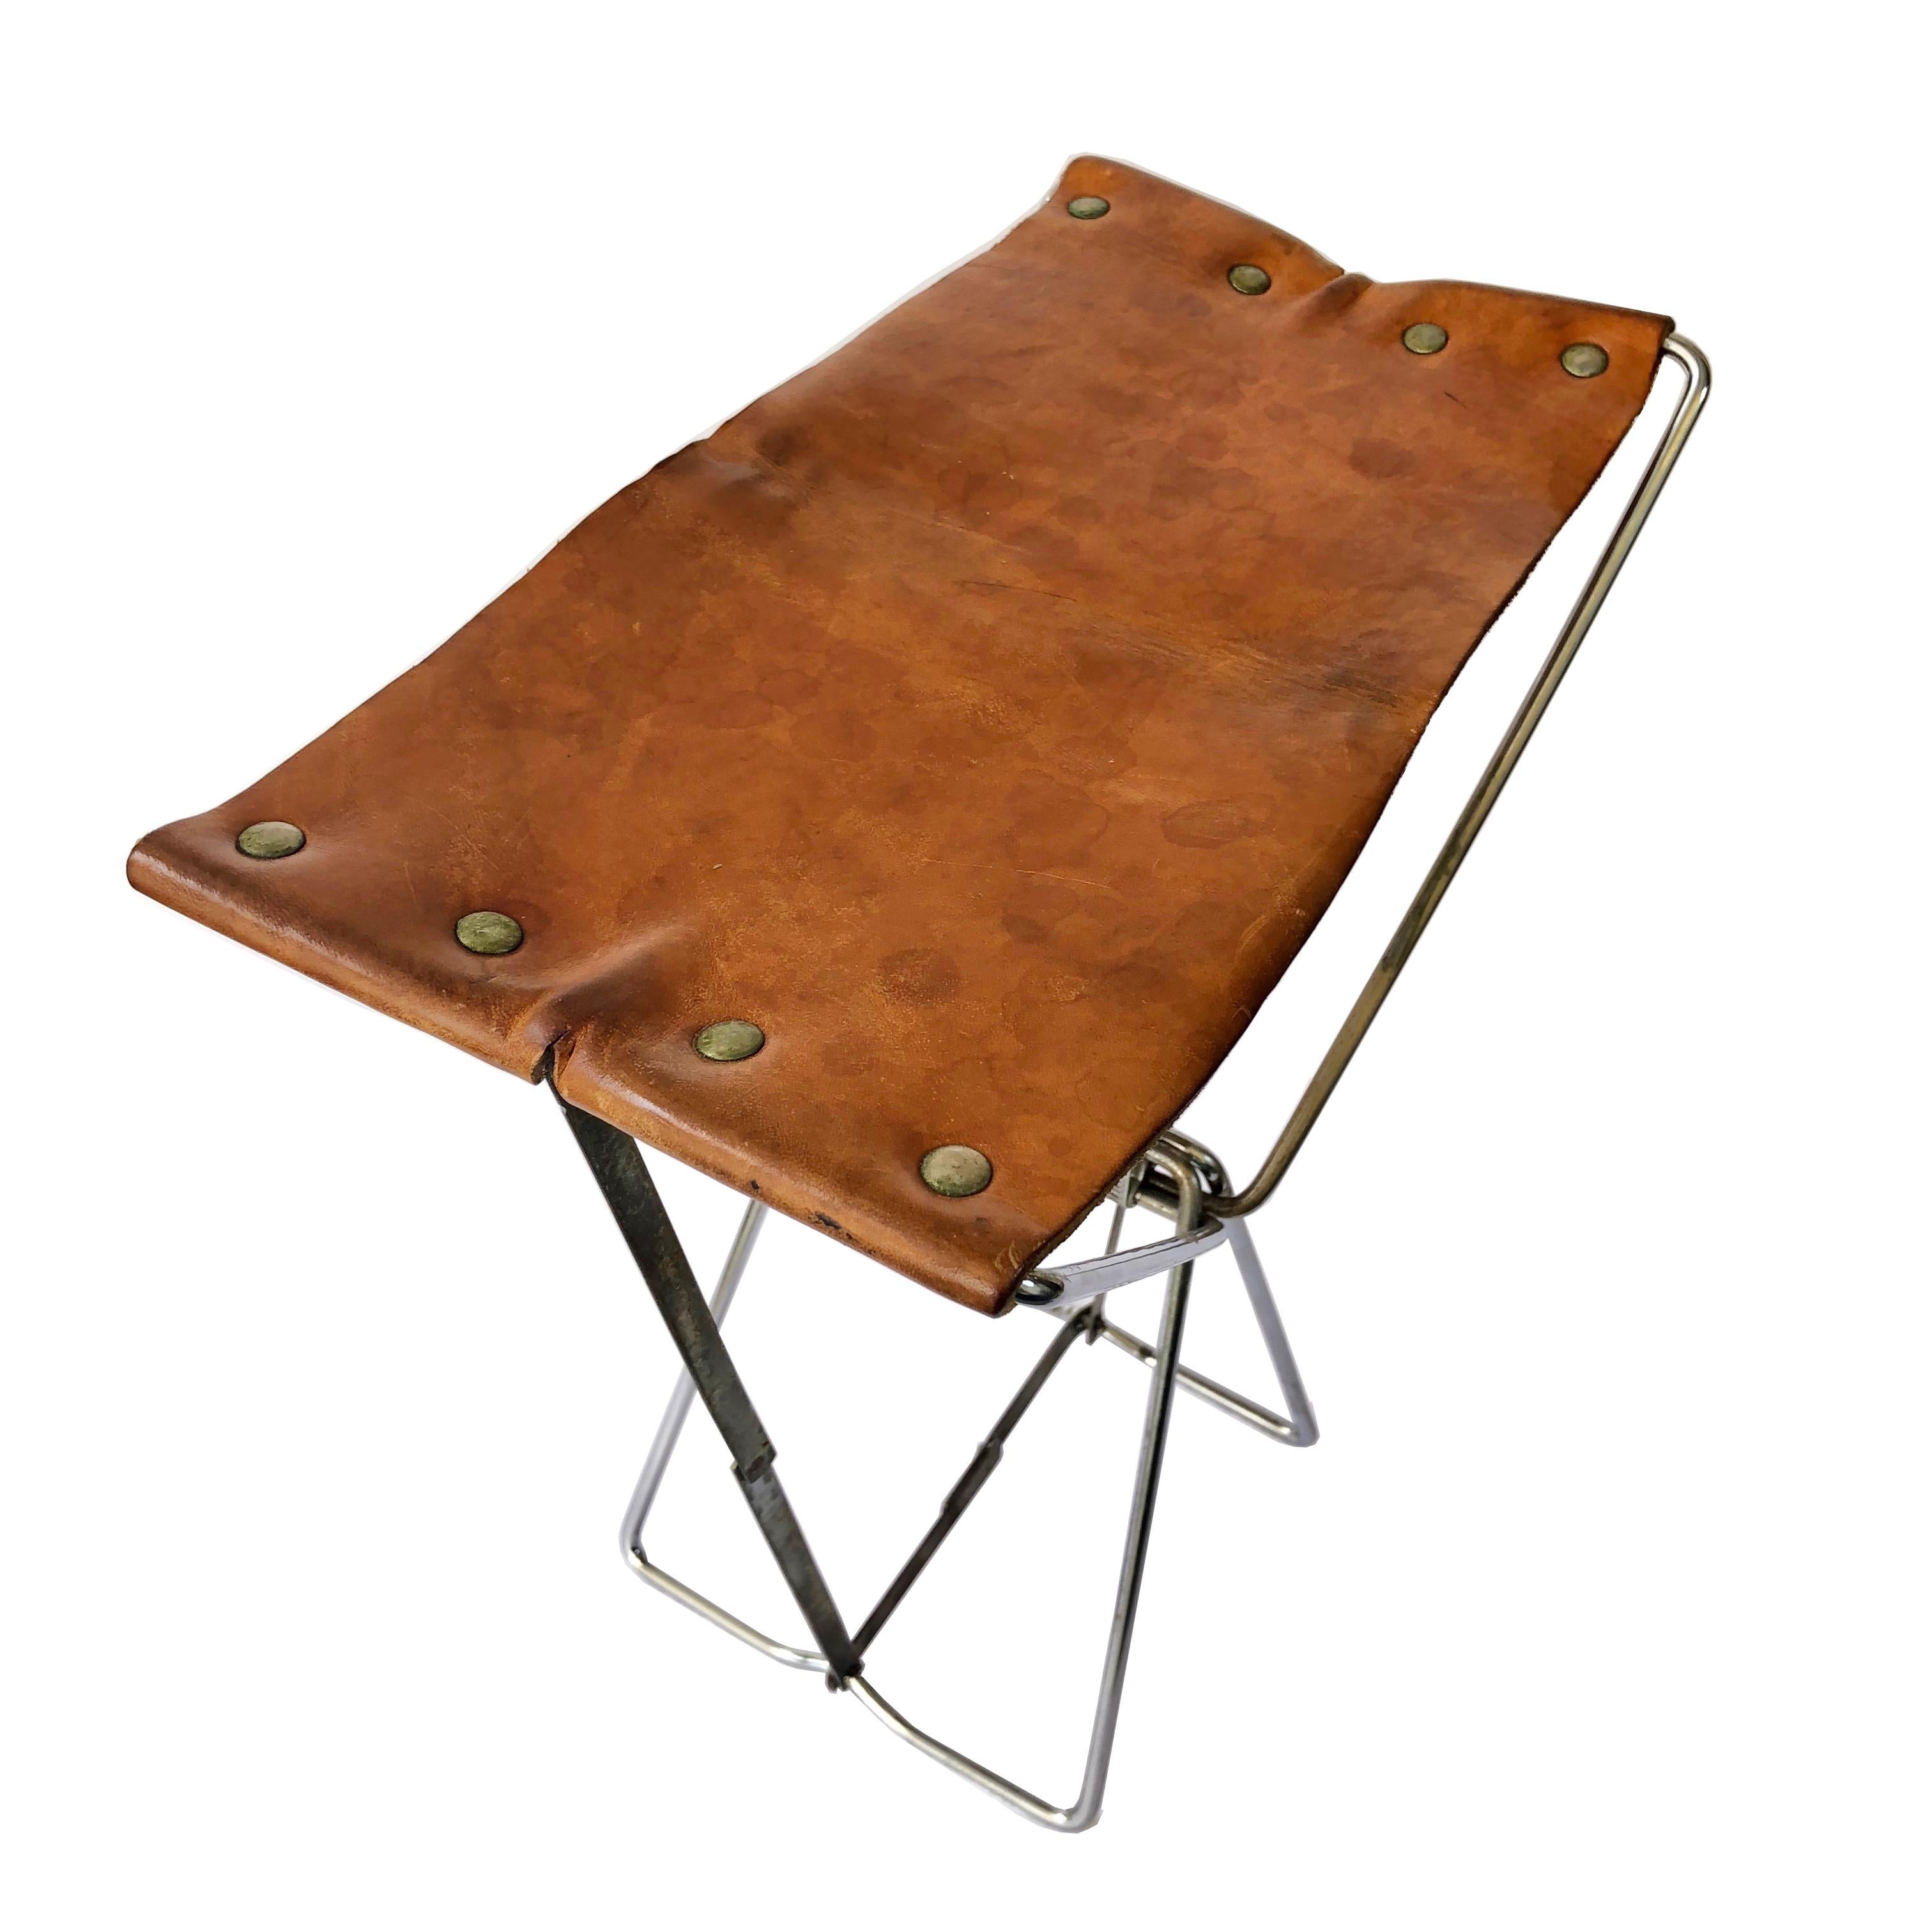 An unique French vintage folding industrial style chair. It is small enough to put into a normal knapsack, functions perfectly and has vintage worthy patina also.